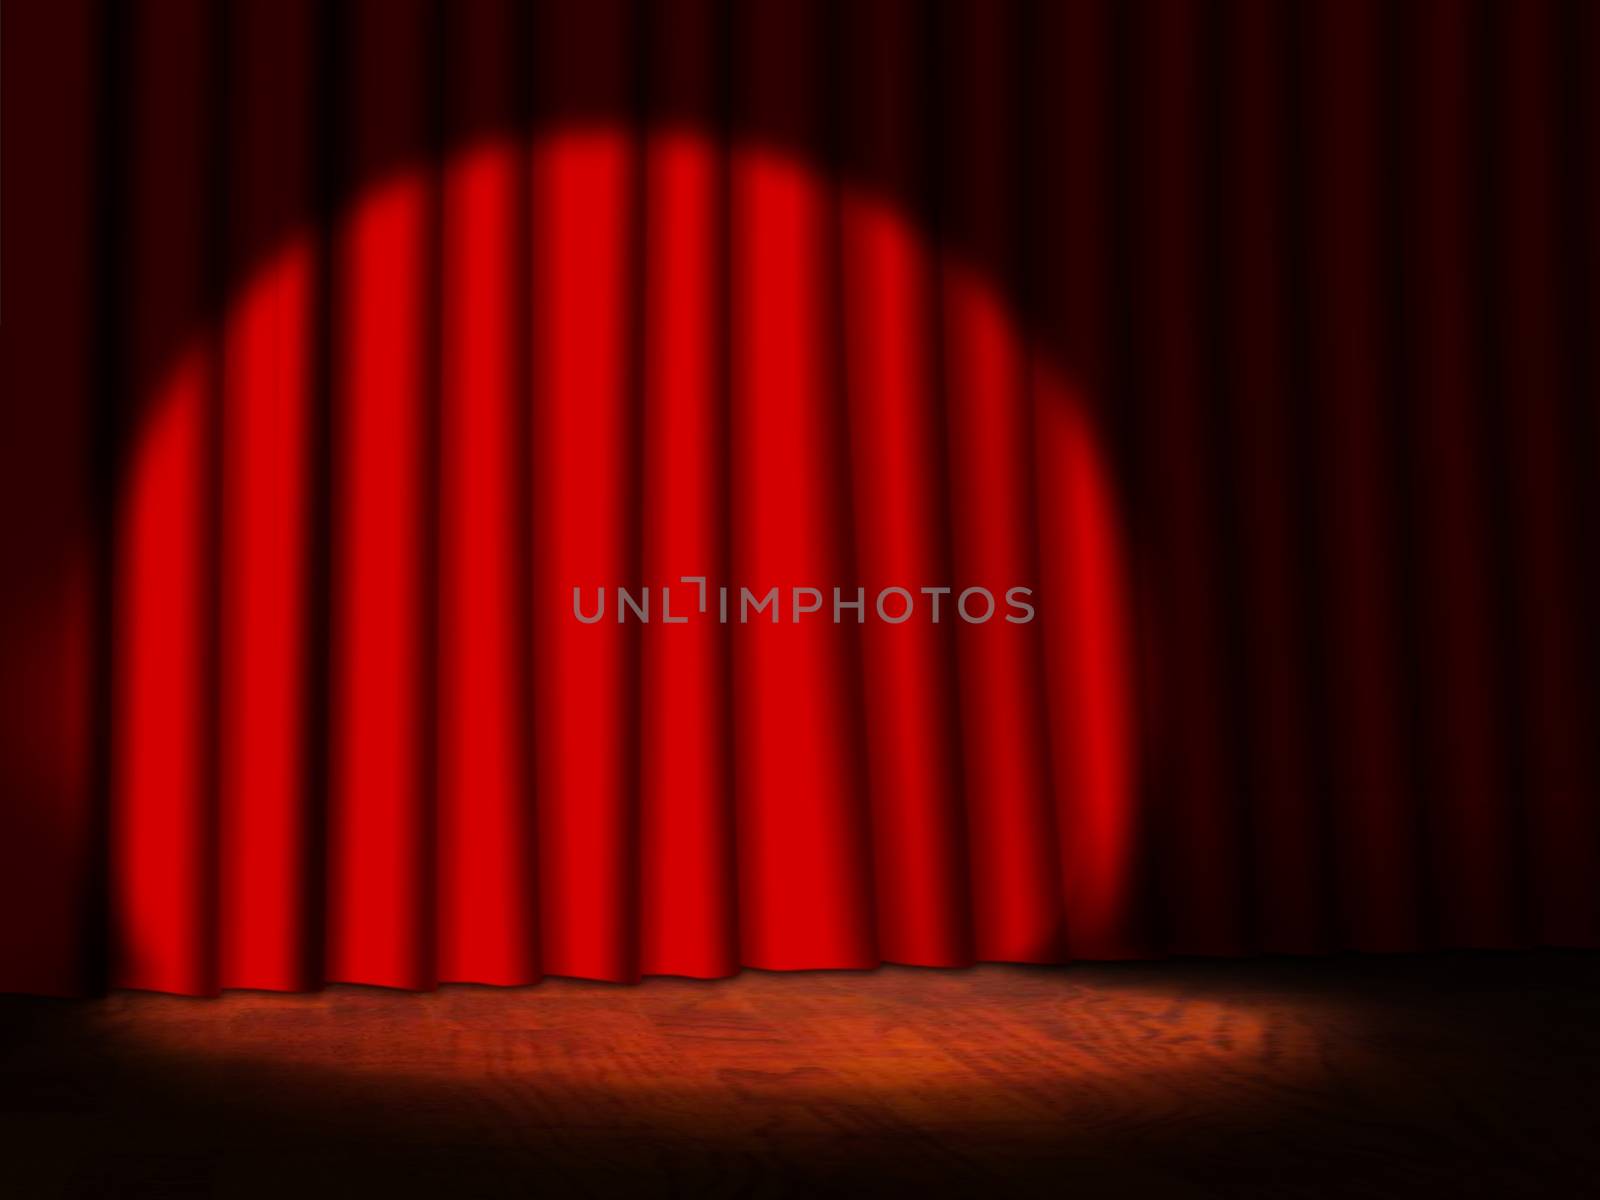 Empty Stage with Red Curtains and Spotlight